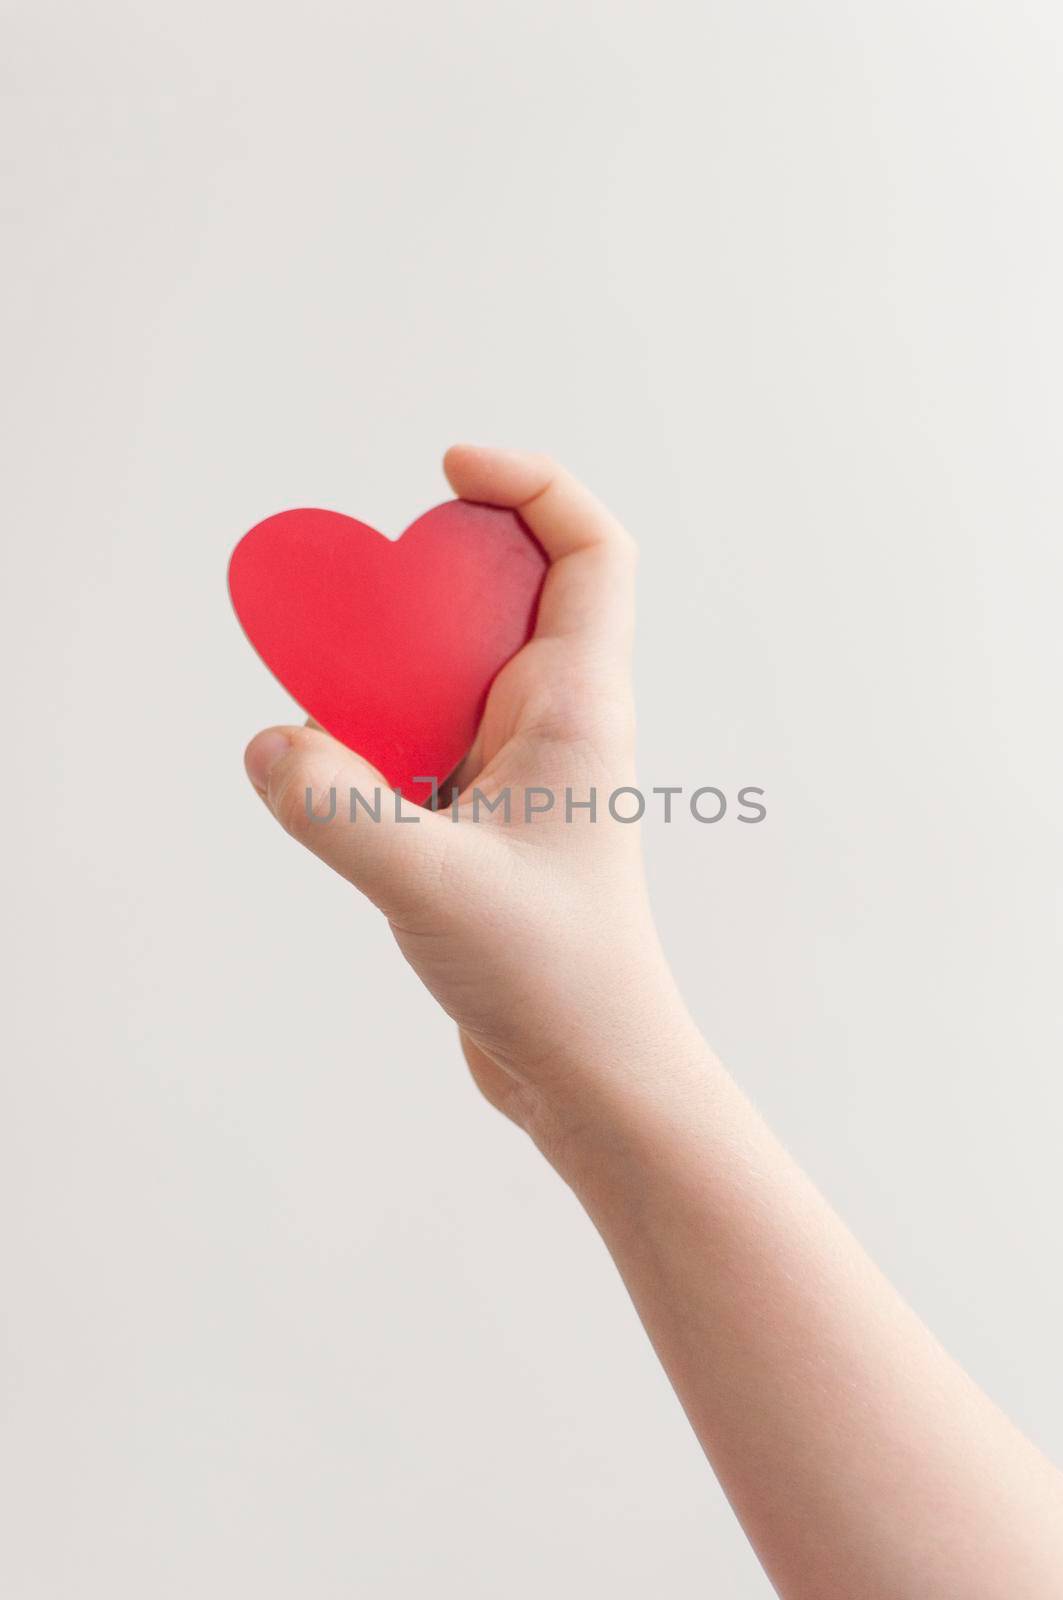 Baby's hand holding a red heart over white wall background 